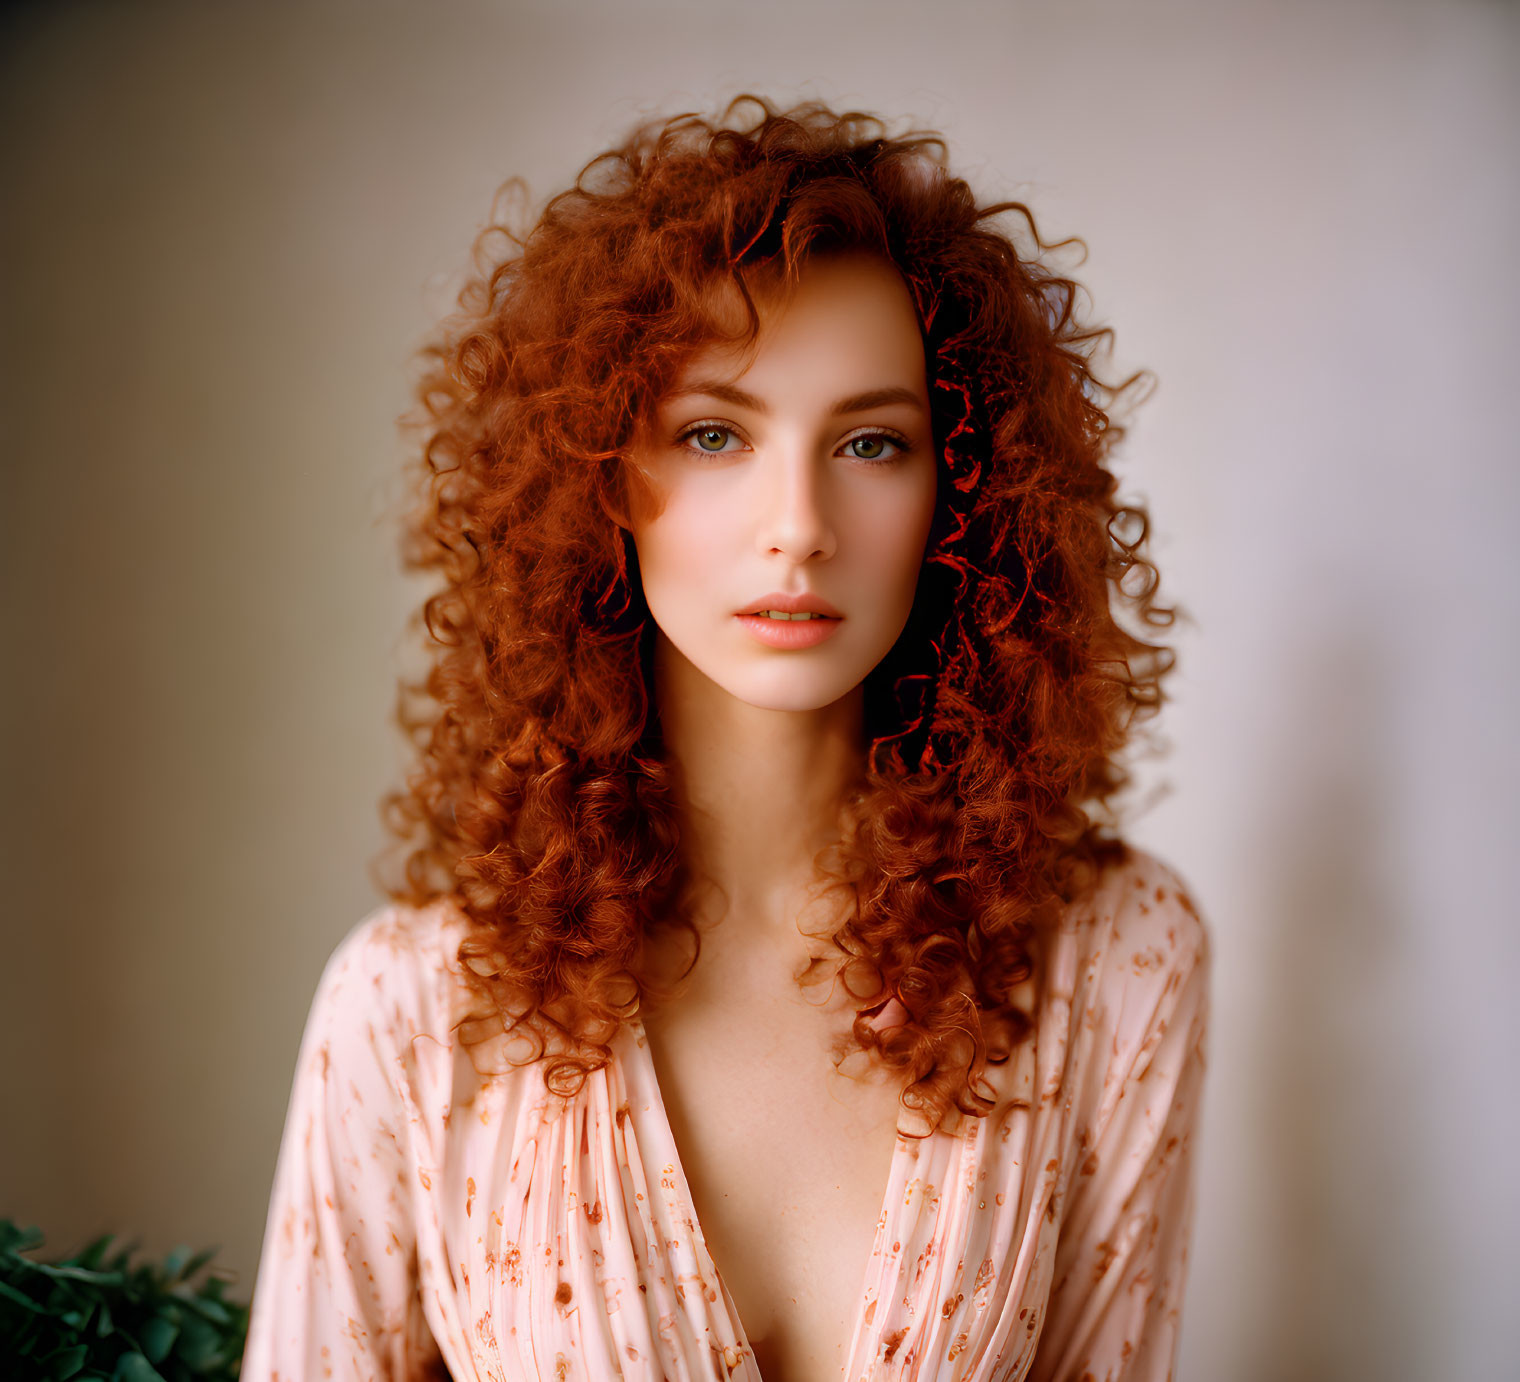 Curly Red-Haired Woman in Peach Blouse with Green Eyes